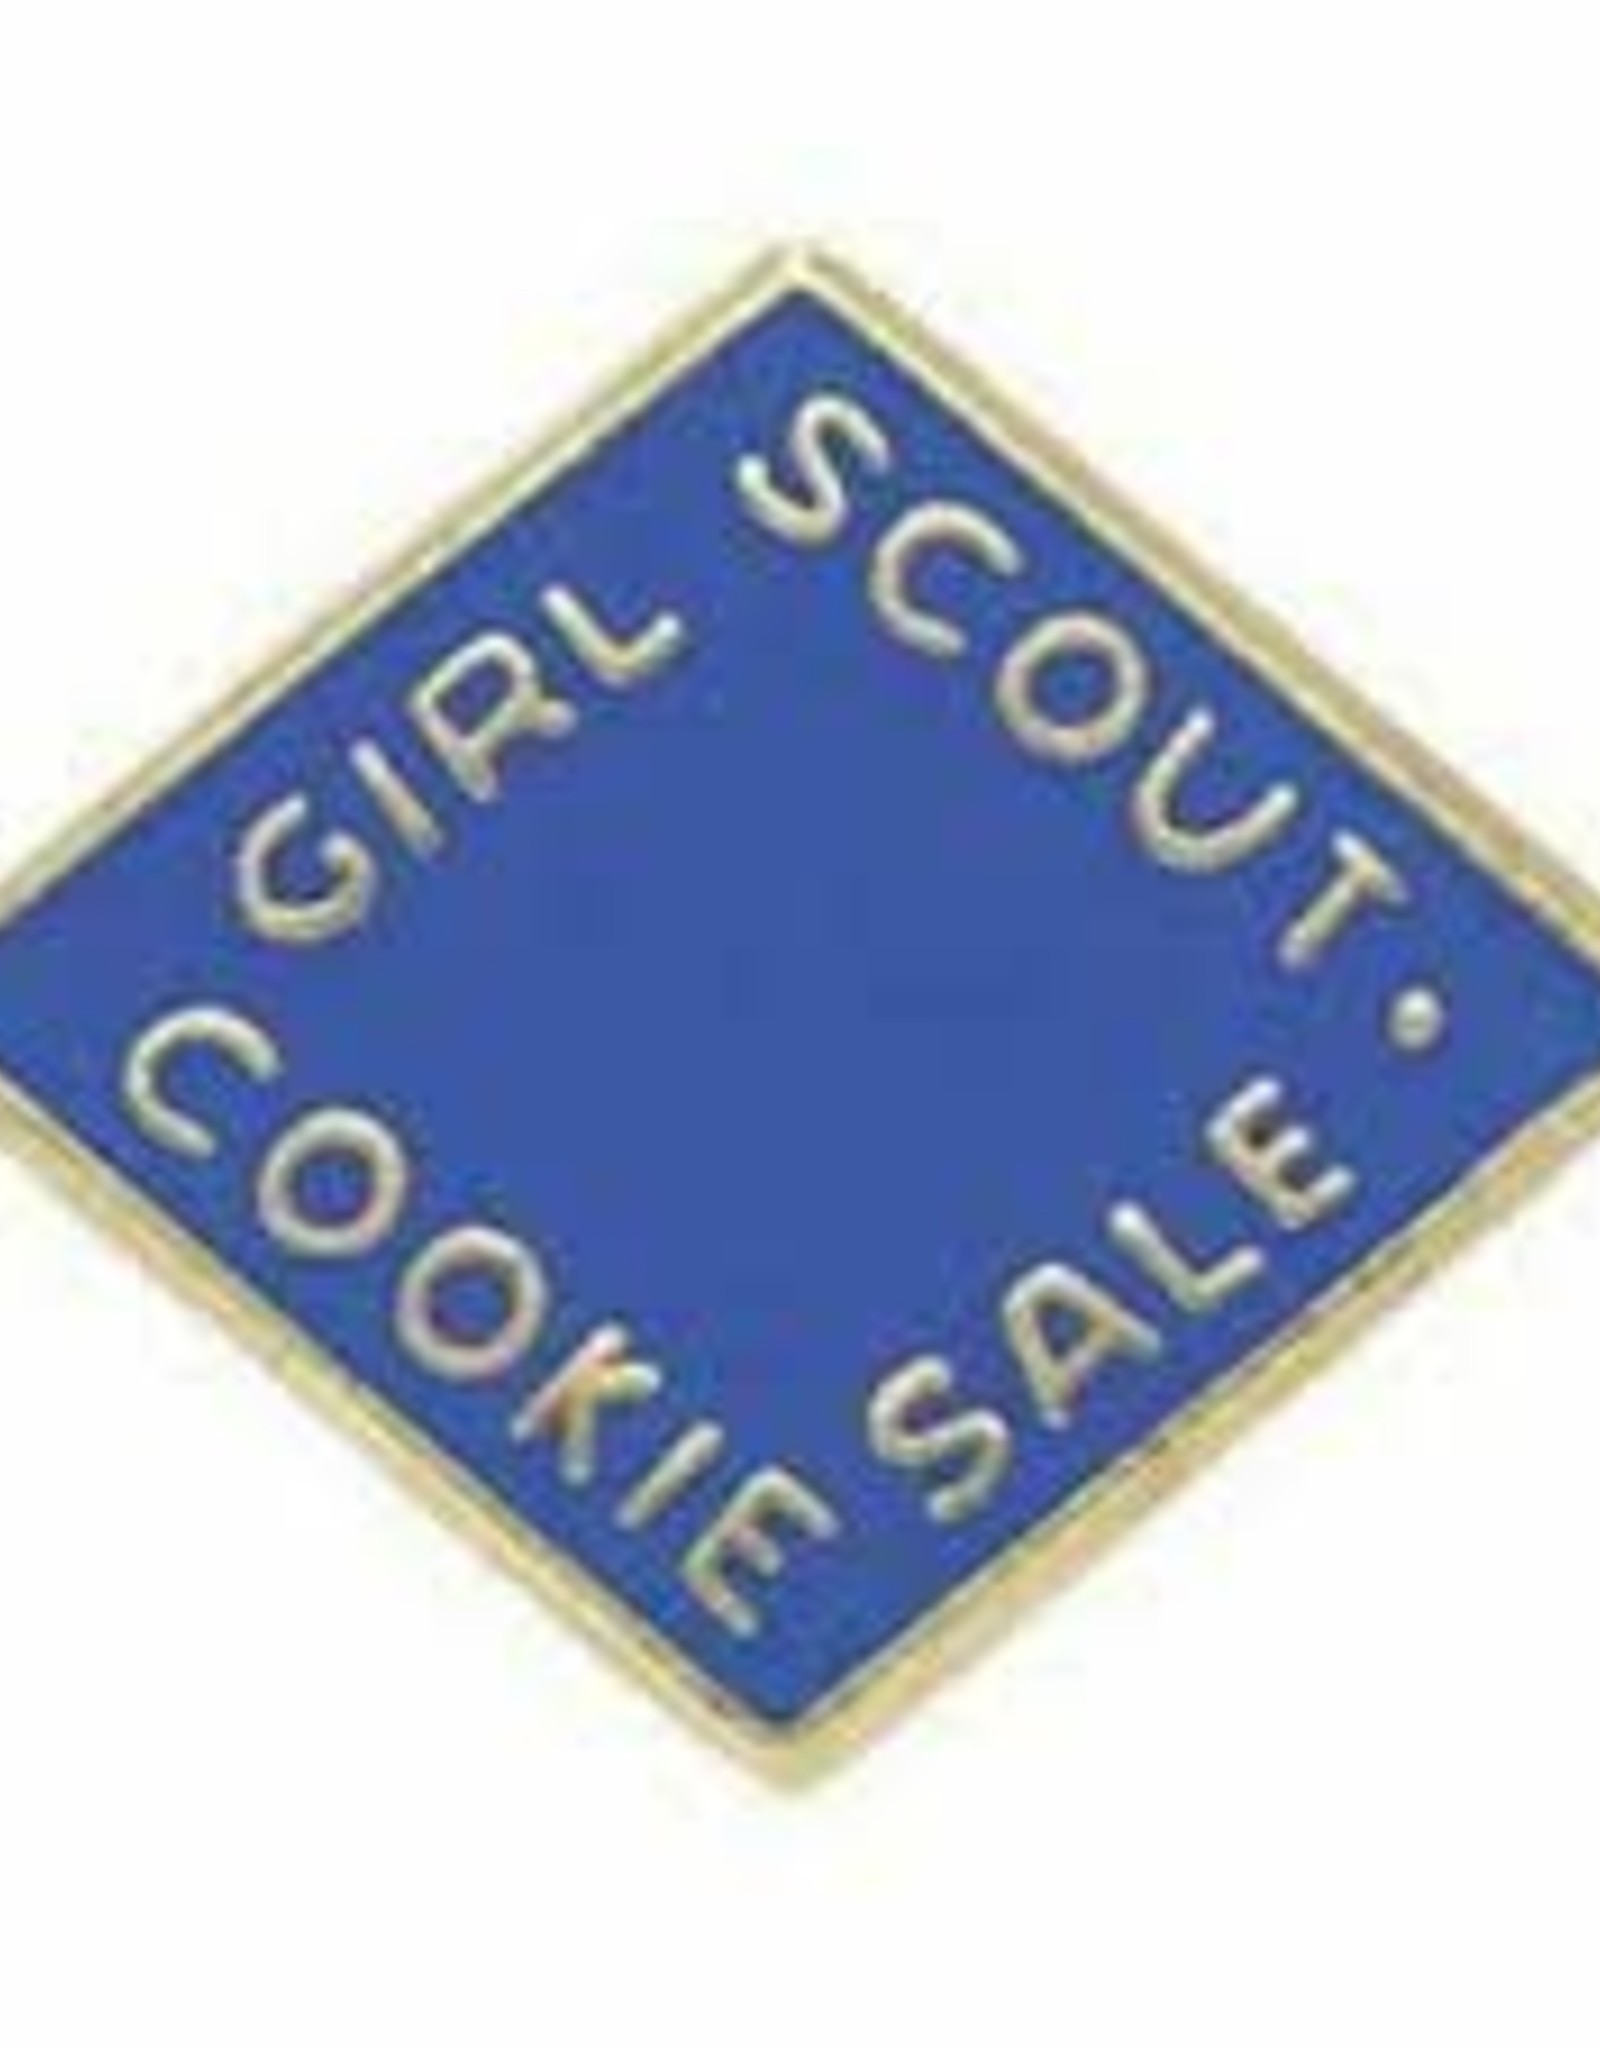 GIRL SCOUTS OF THE USA ! 2004 Cookie Activity Pin Dark Purple